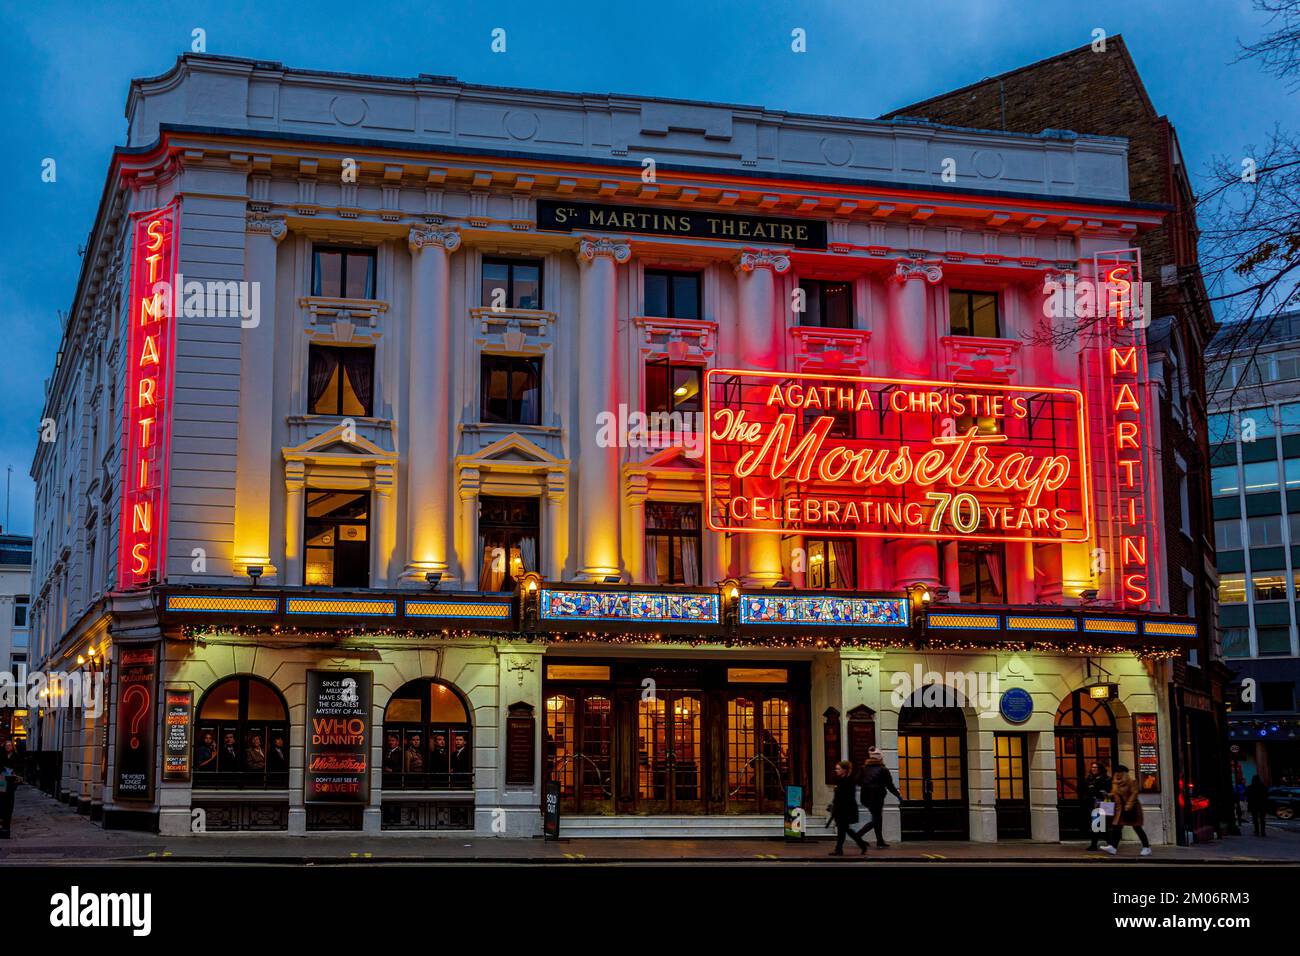 The Mousetrap, the world's longest running play at the St Martin's Theatre in London's West End, running continuously since 1952 celebrating 70 years. Stock Photo